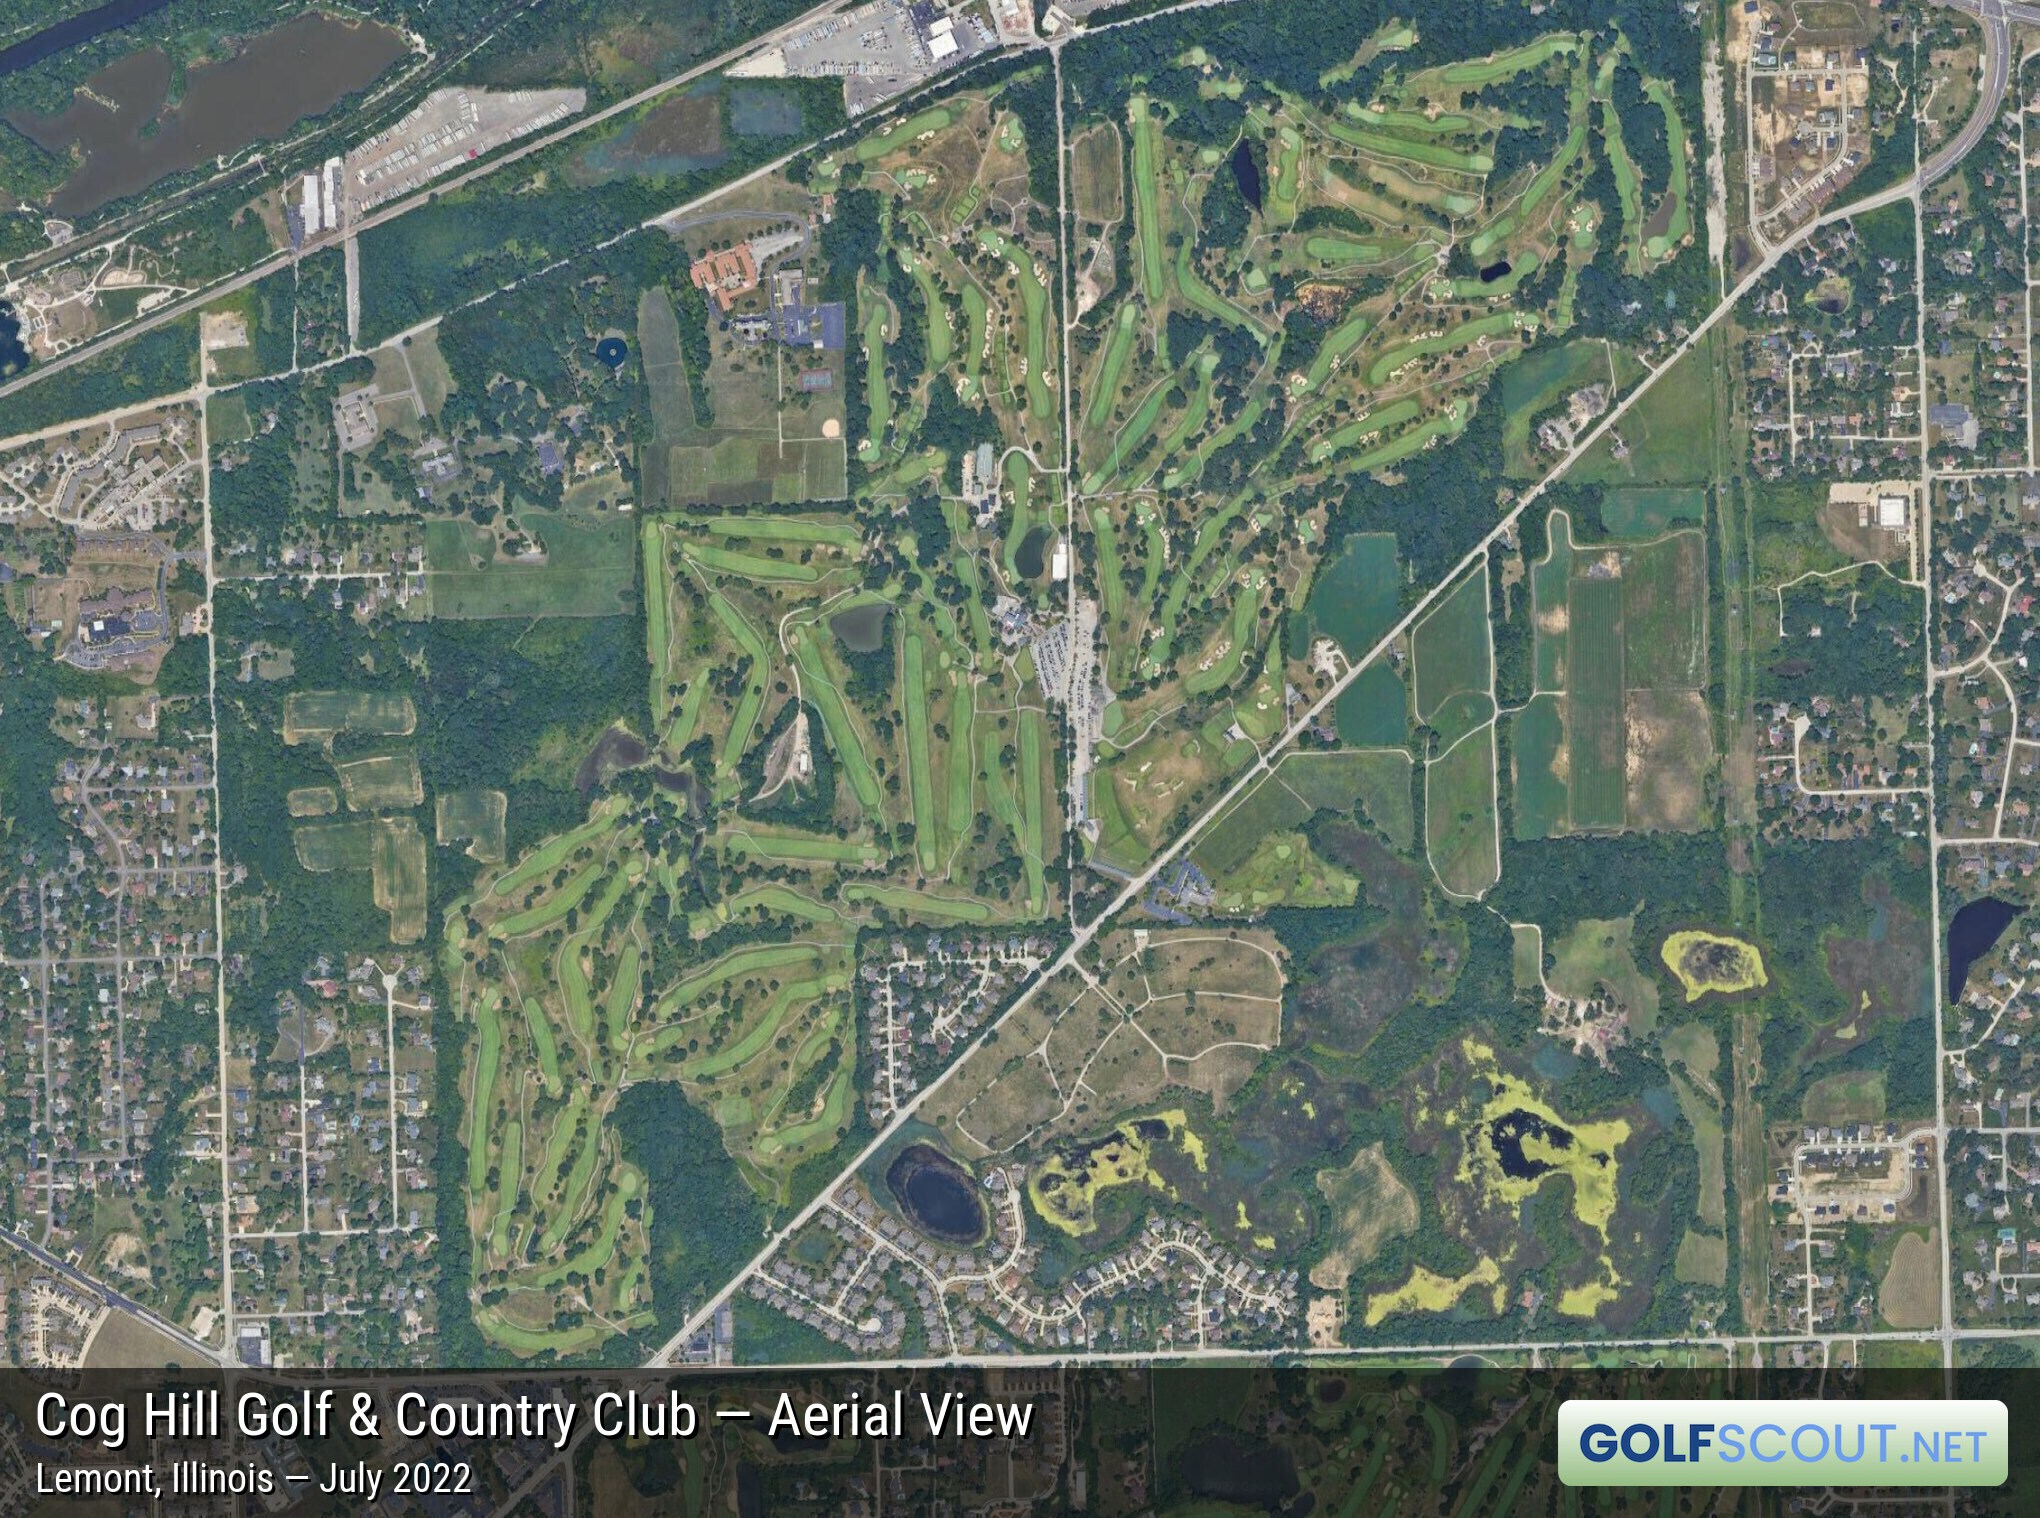 Aerial satellite imagery of Cog Hill Course #2 - Ravines in Lemont, Illinois. Cog Hill has 4 courses. Courses 2 and 4 are located in the northeast portion of the property. Image courtesy of Google Maps.